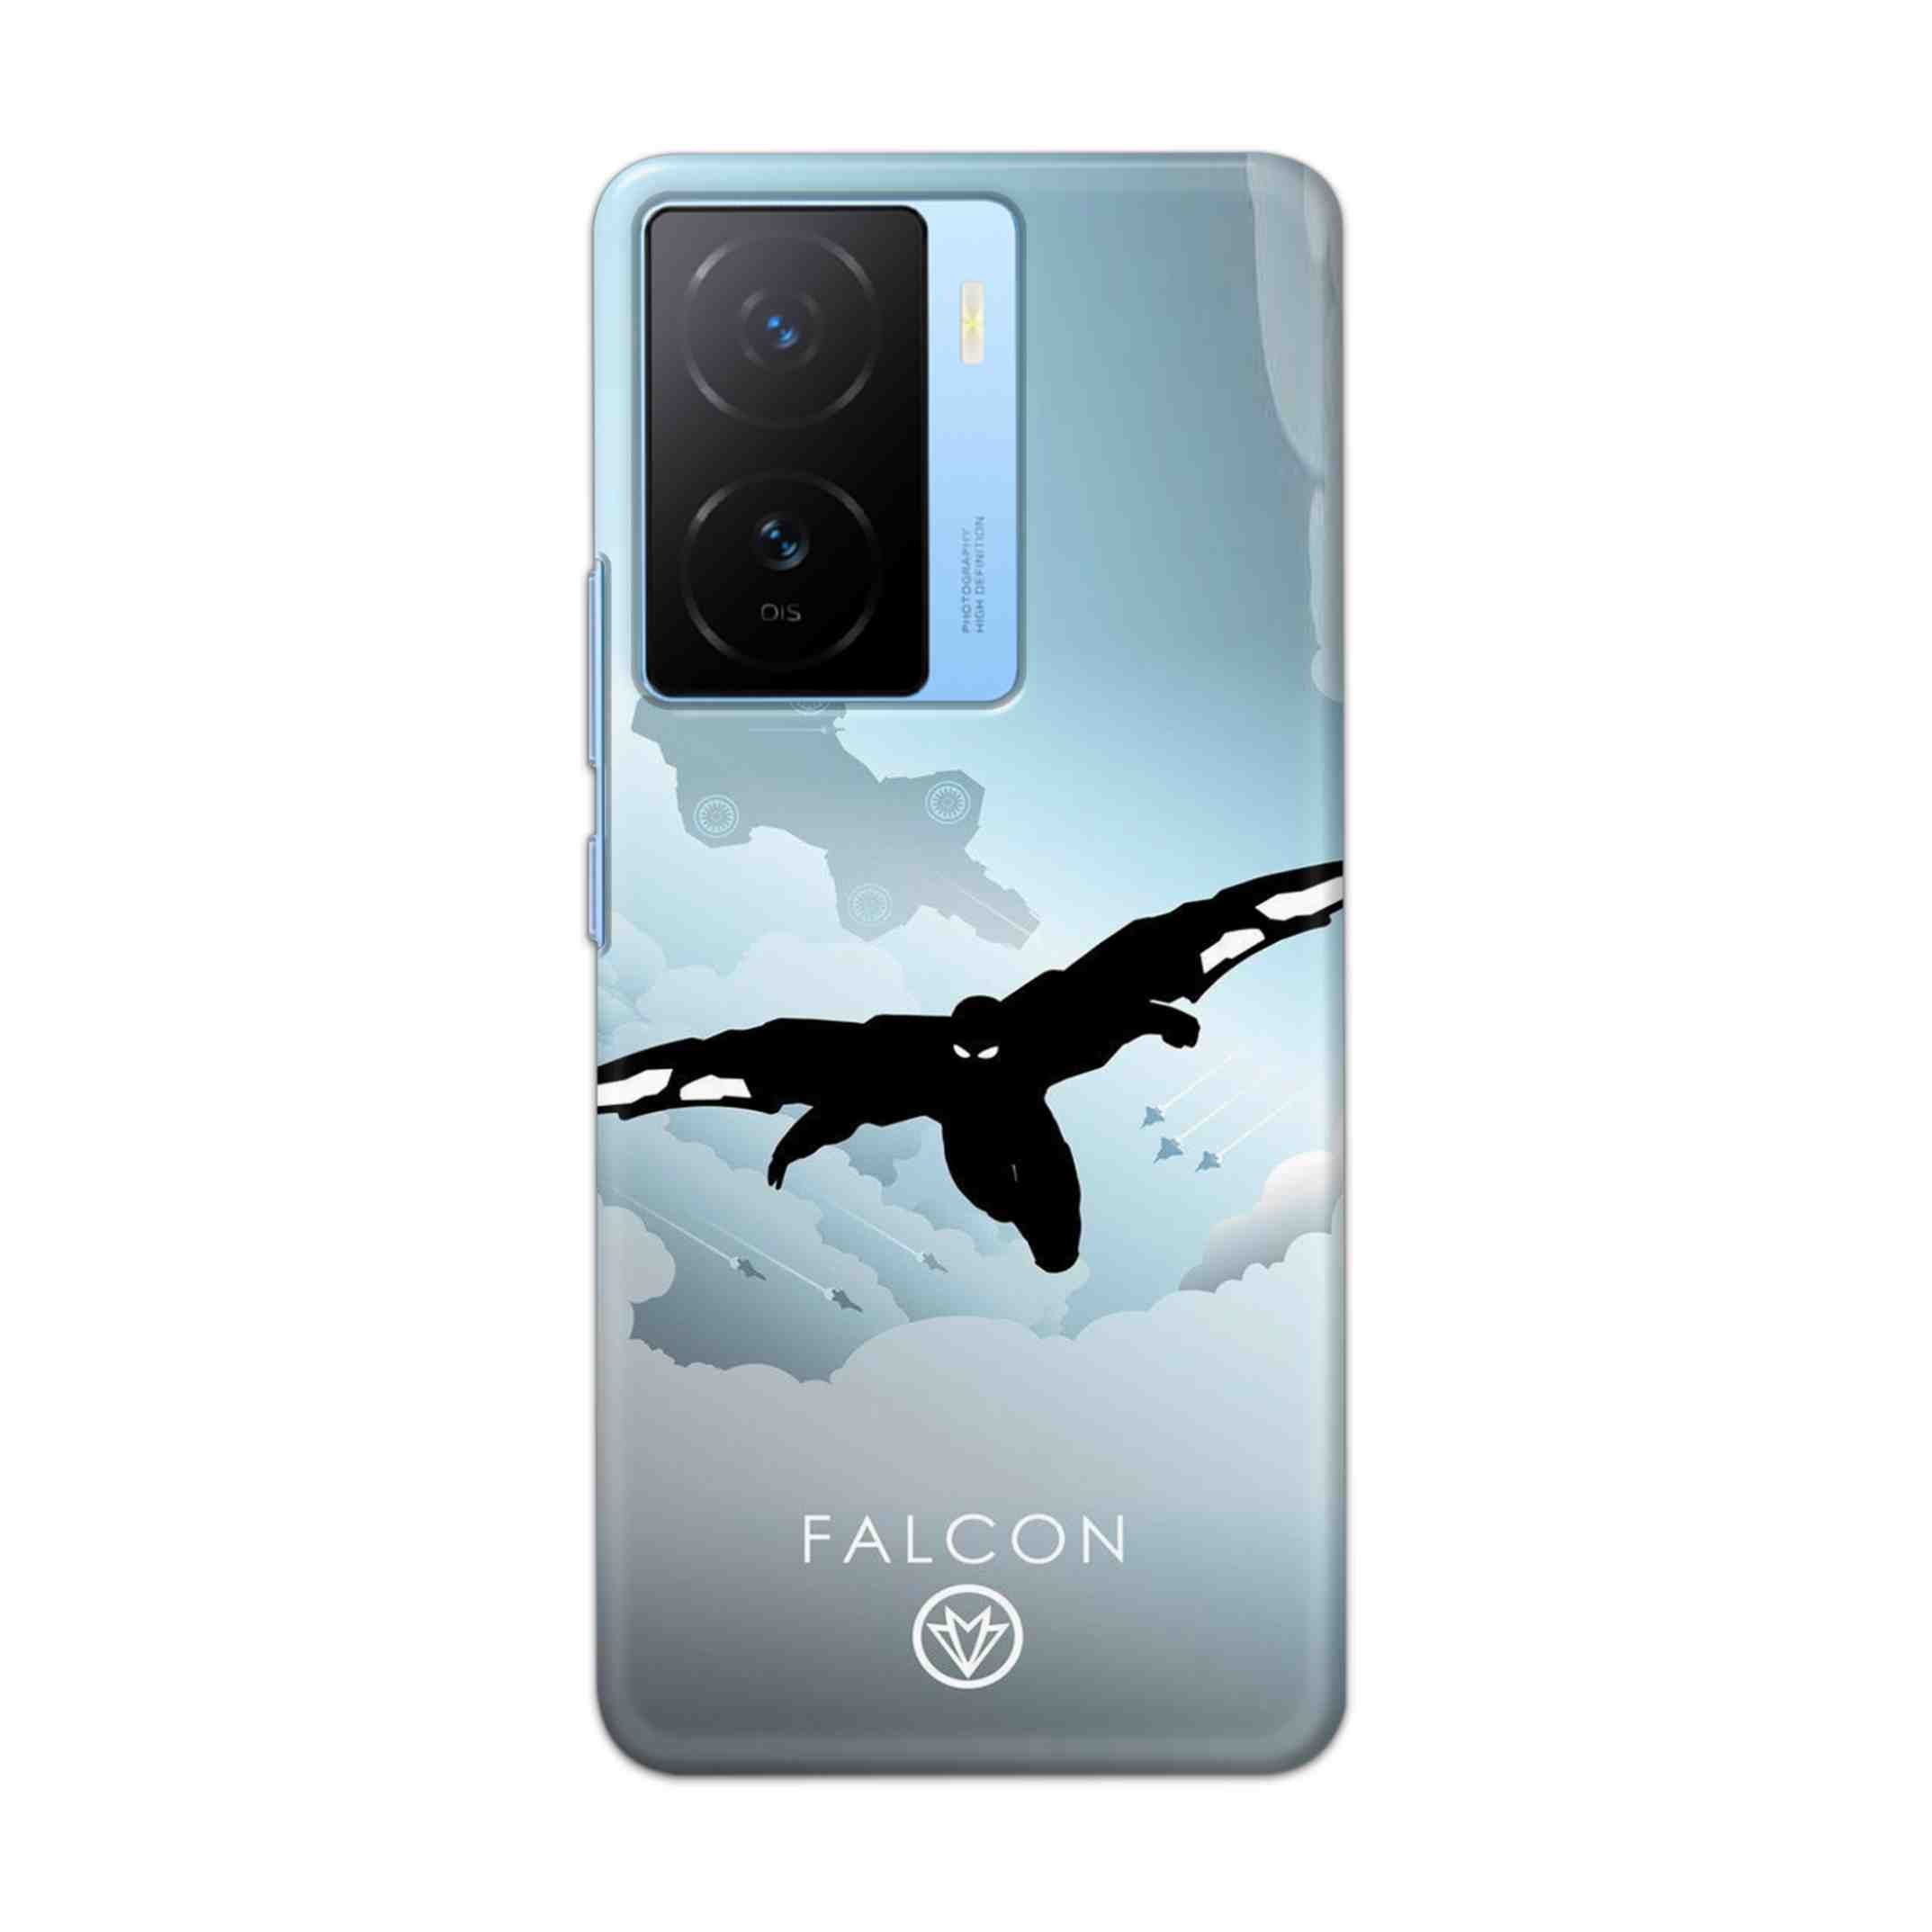 Buy Falcon Hard Back Mobile Phone Case/Cover For iQOO Z7s Online